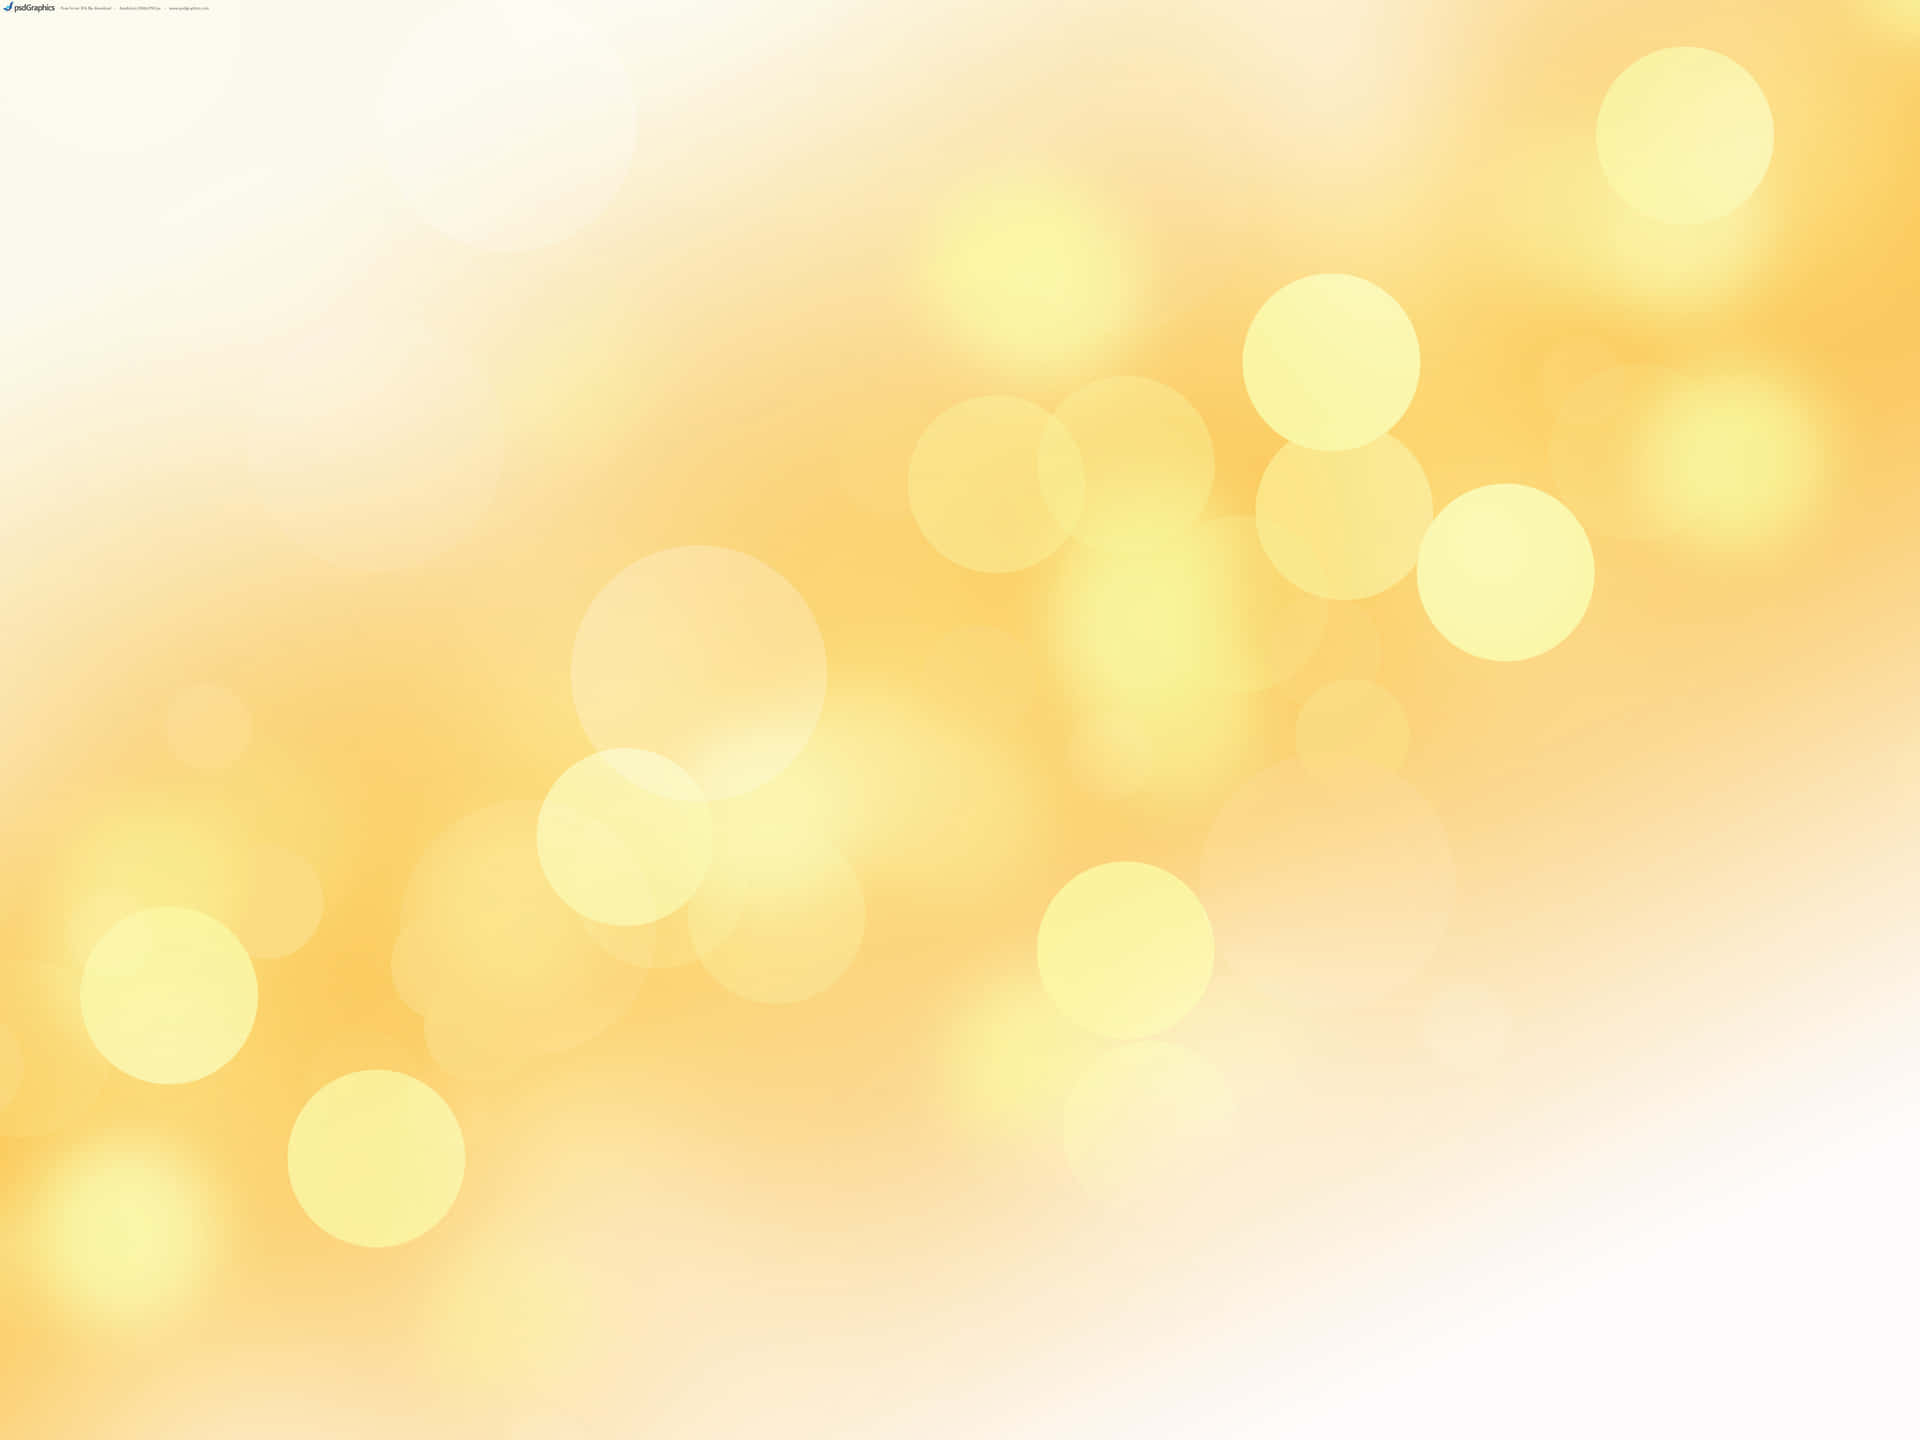 100+] Yellow Texture Background s 